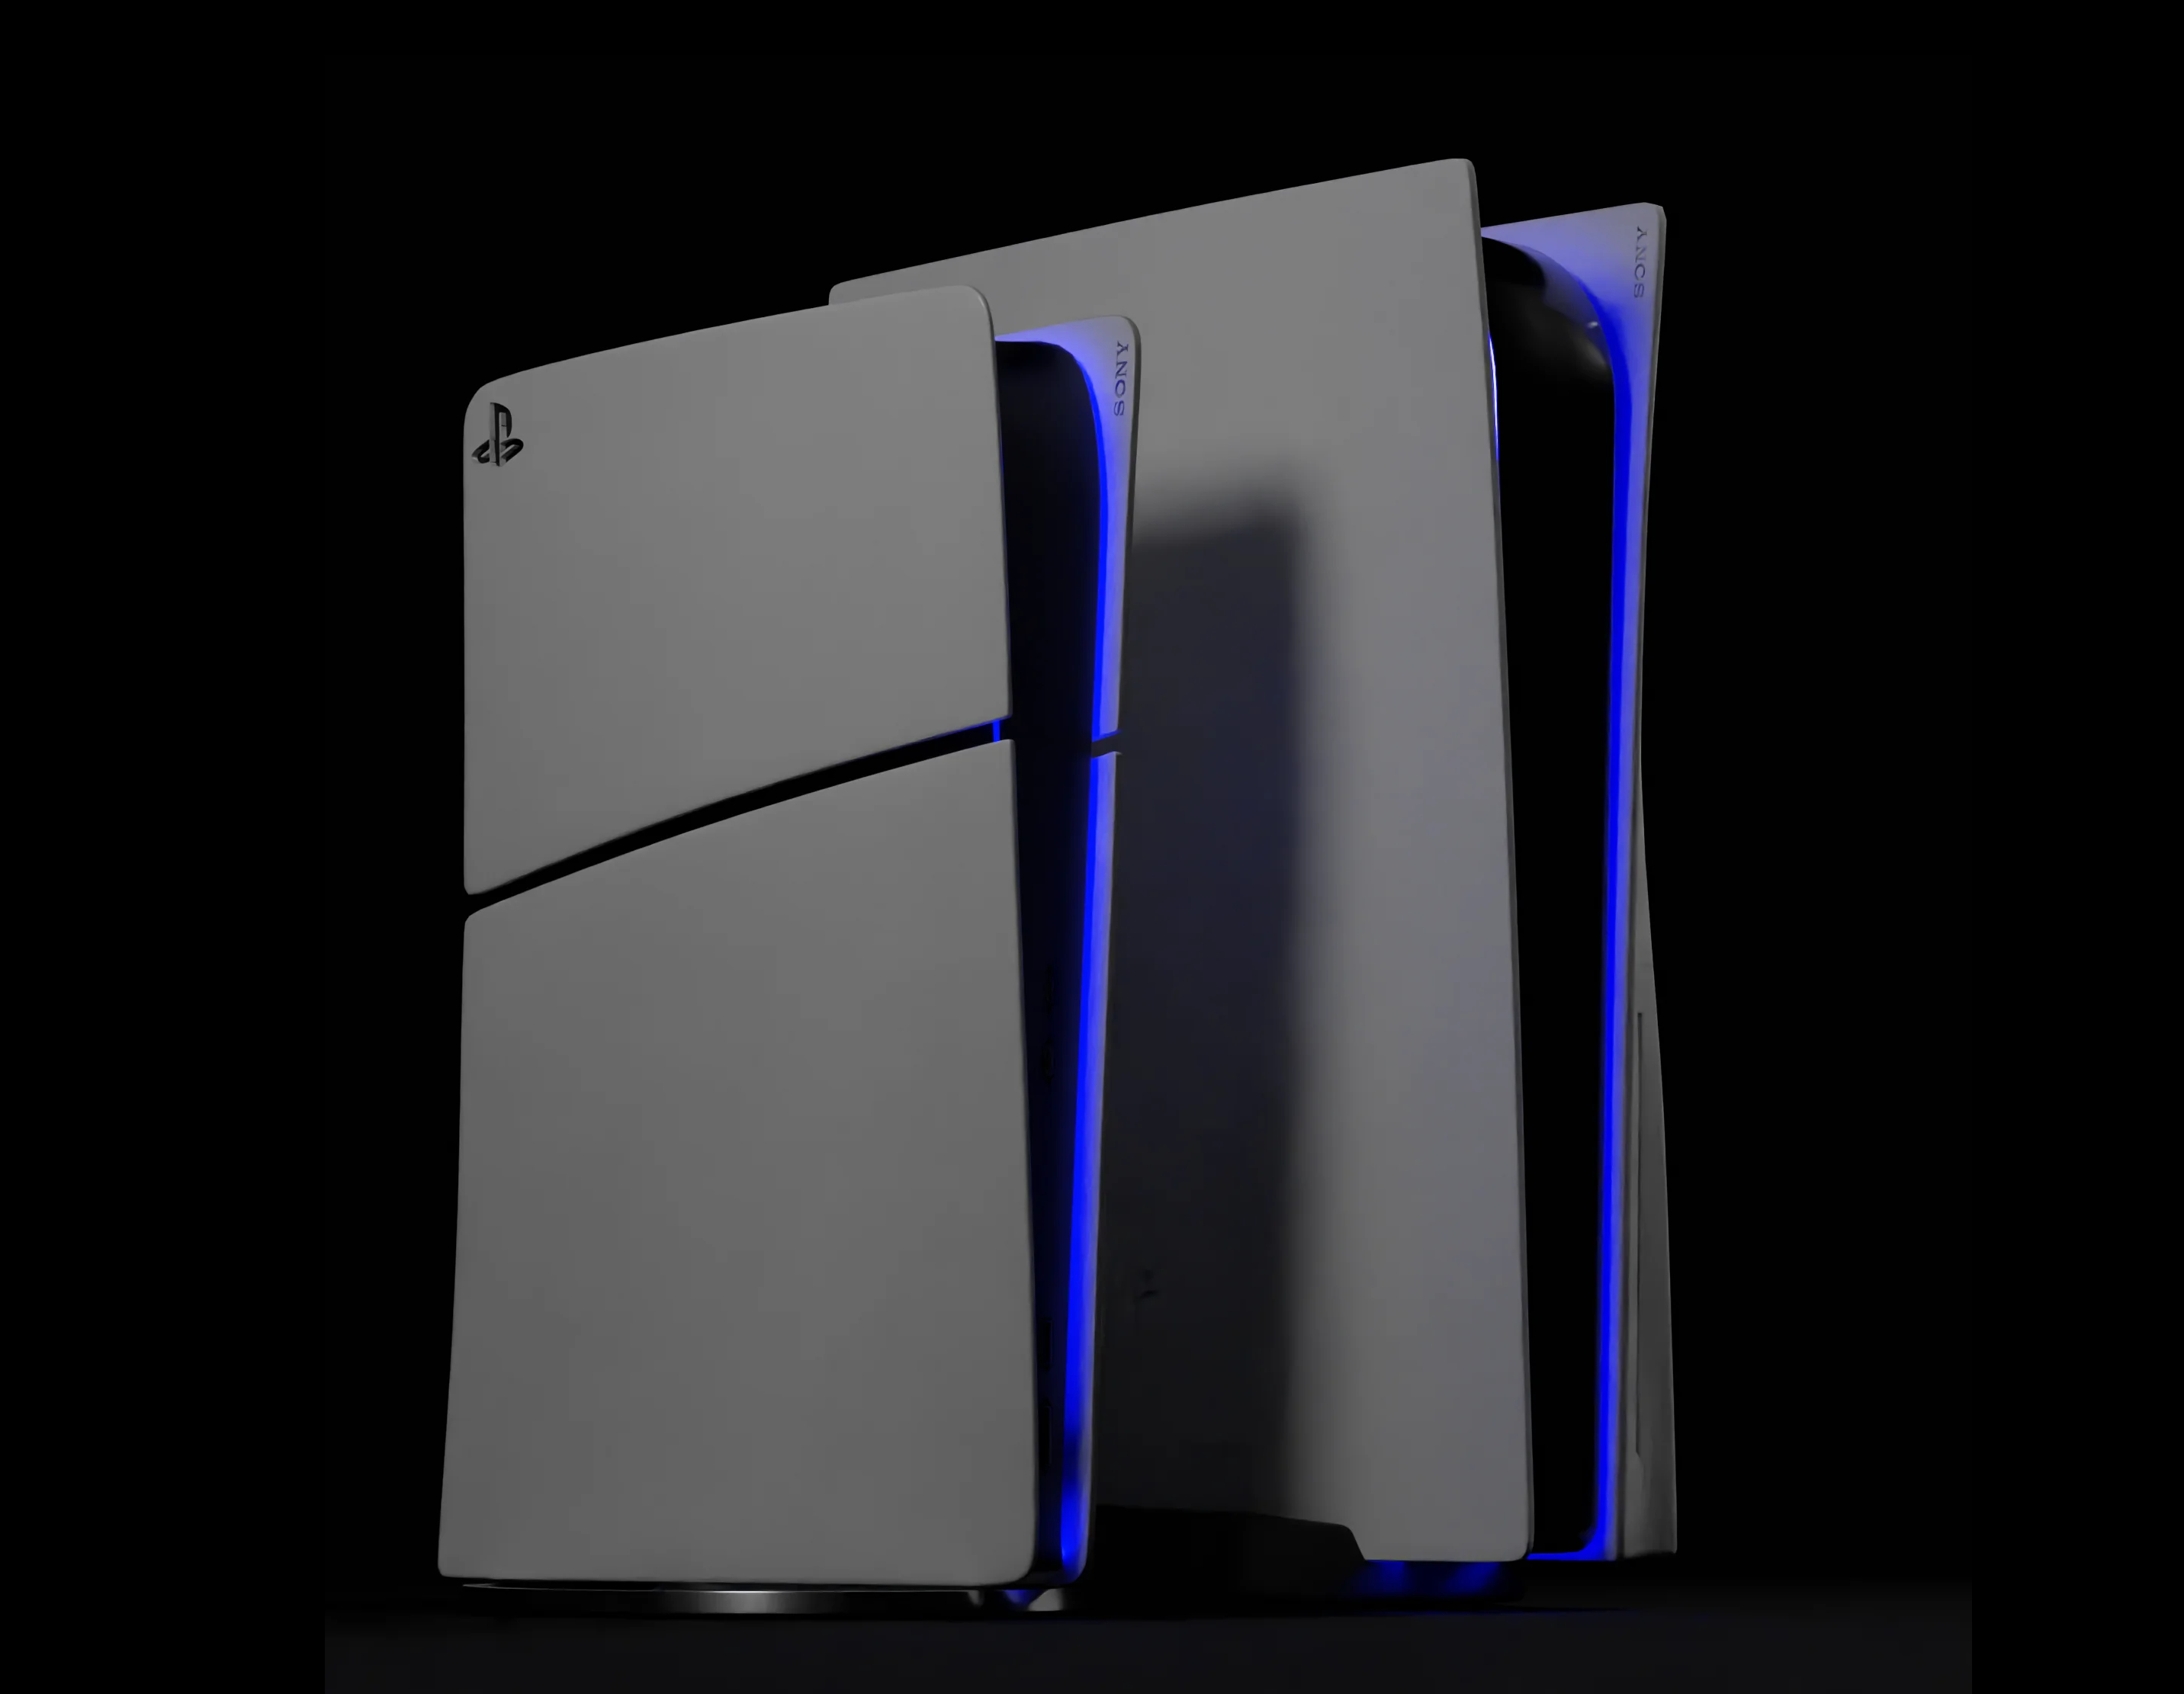 Ps5 slim stand. : r/playstation